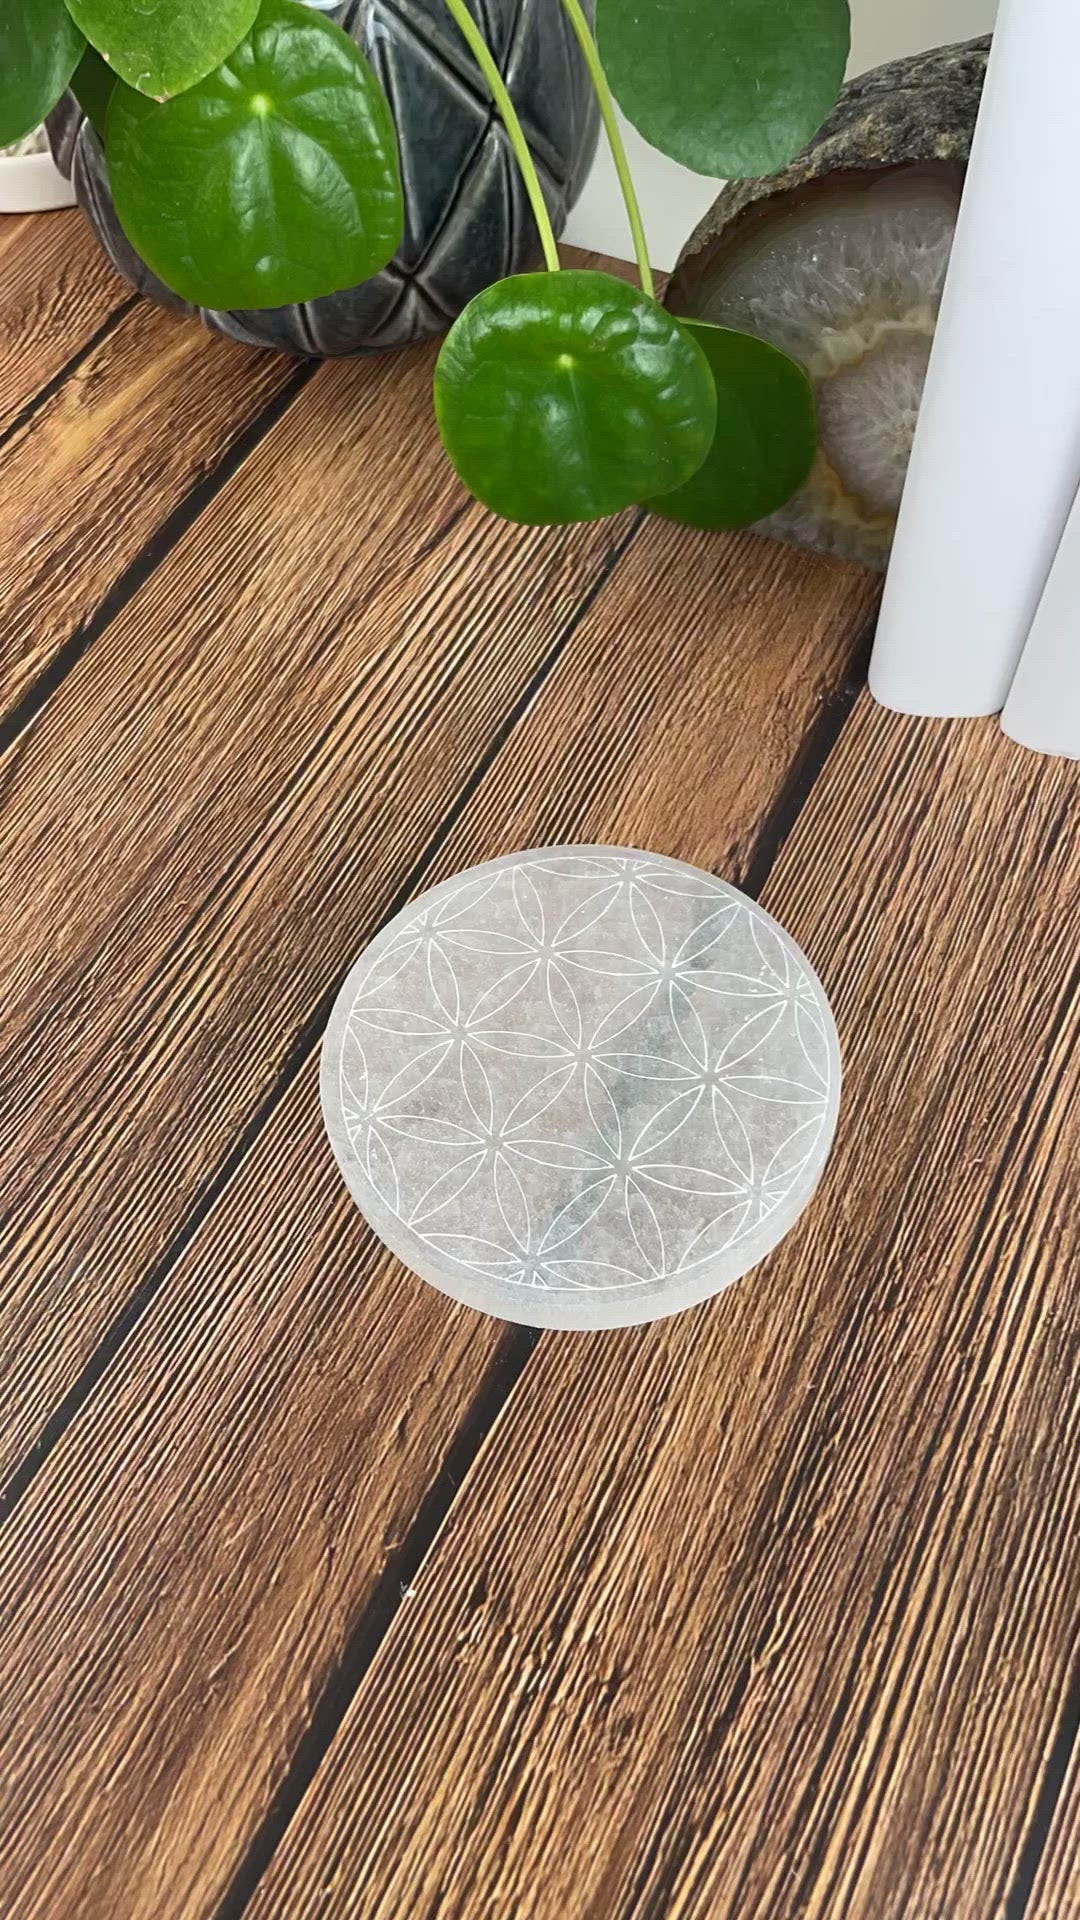 video of selenite round plate engraved with flower of life with charging stones being placed on engraving